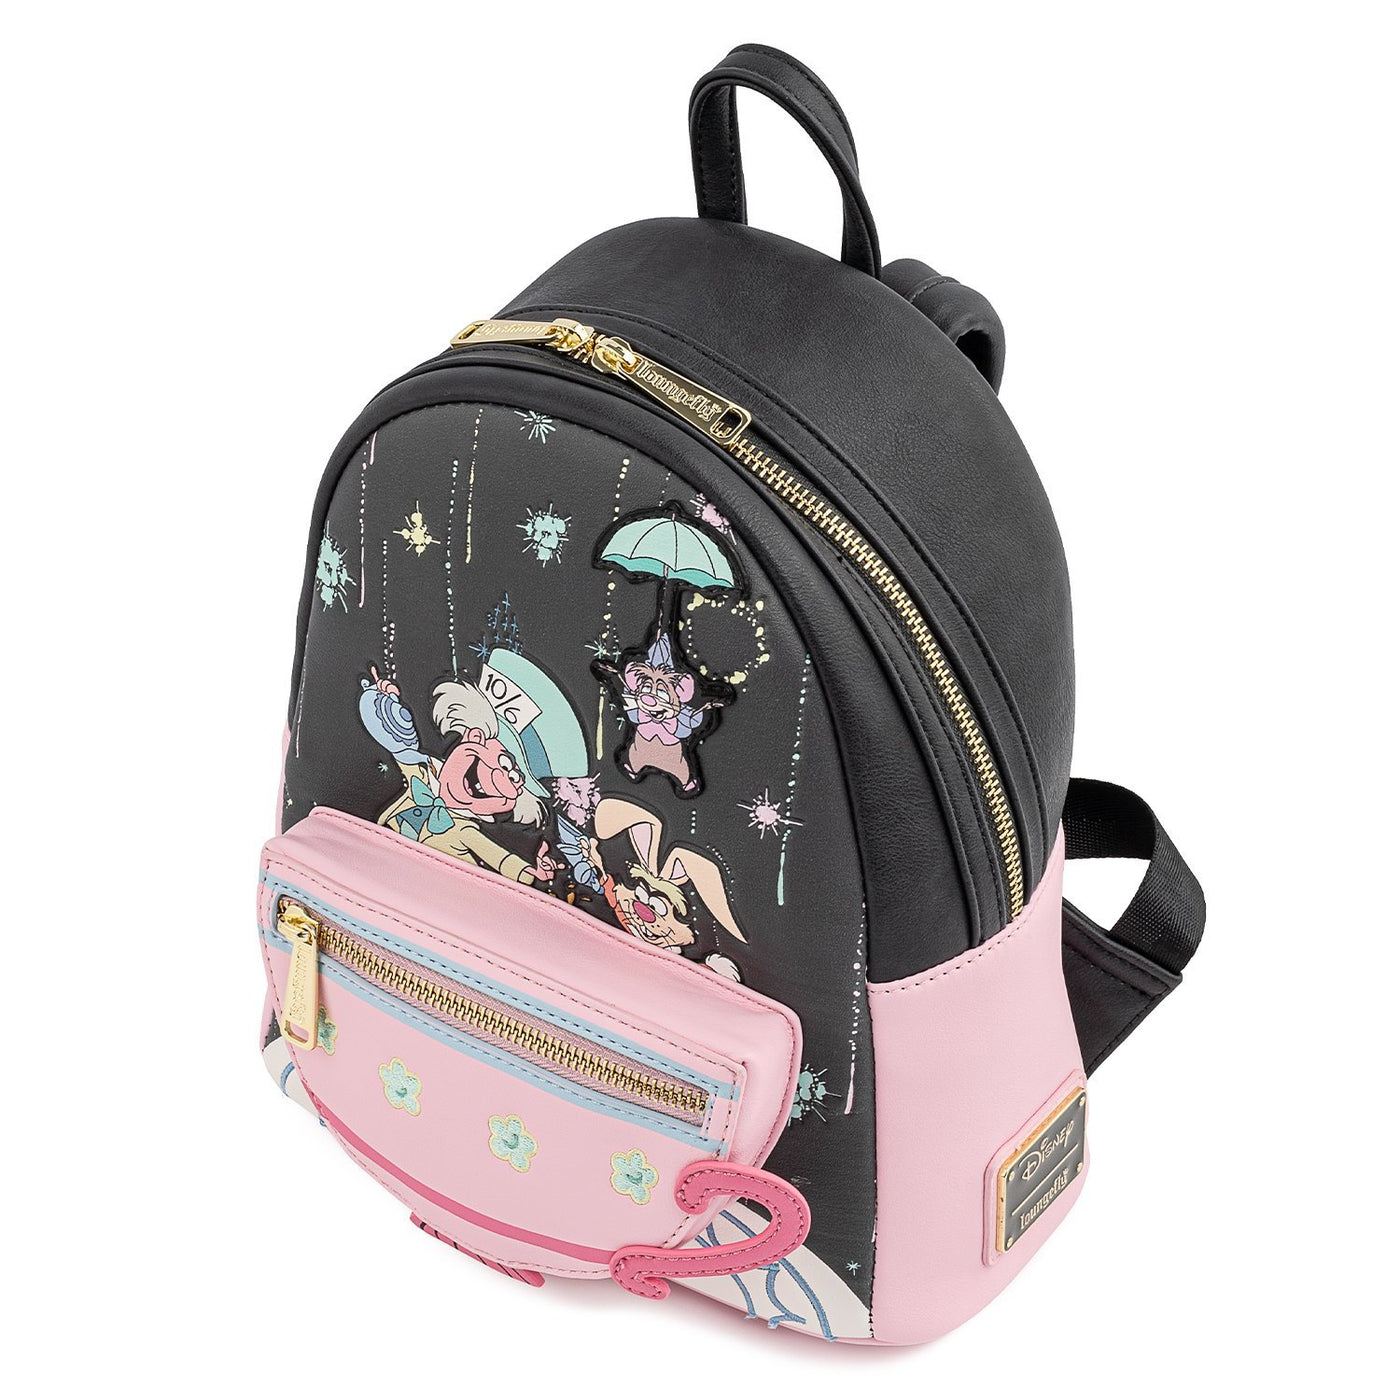 Disney Alice in Wonderland A Very Merry Unbirthday to You Mini Backpack